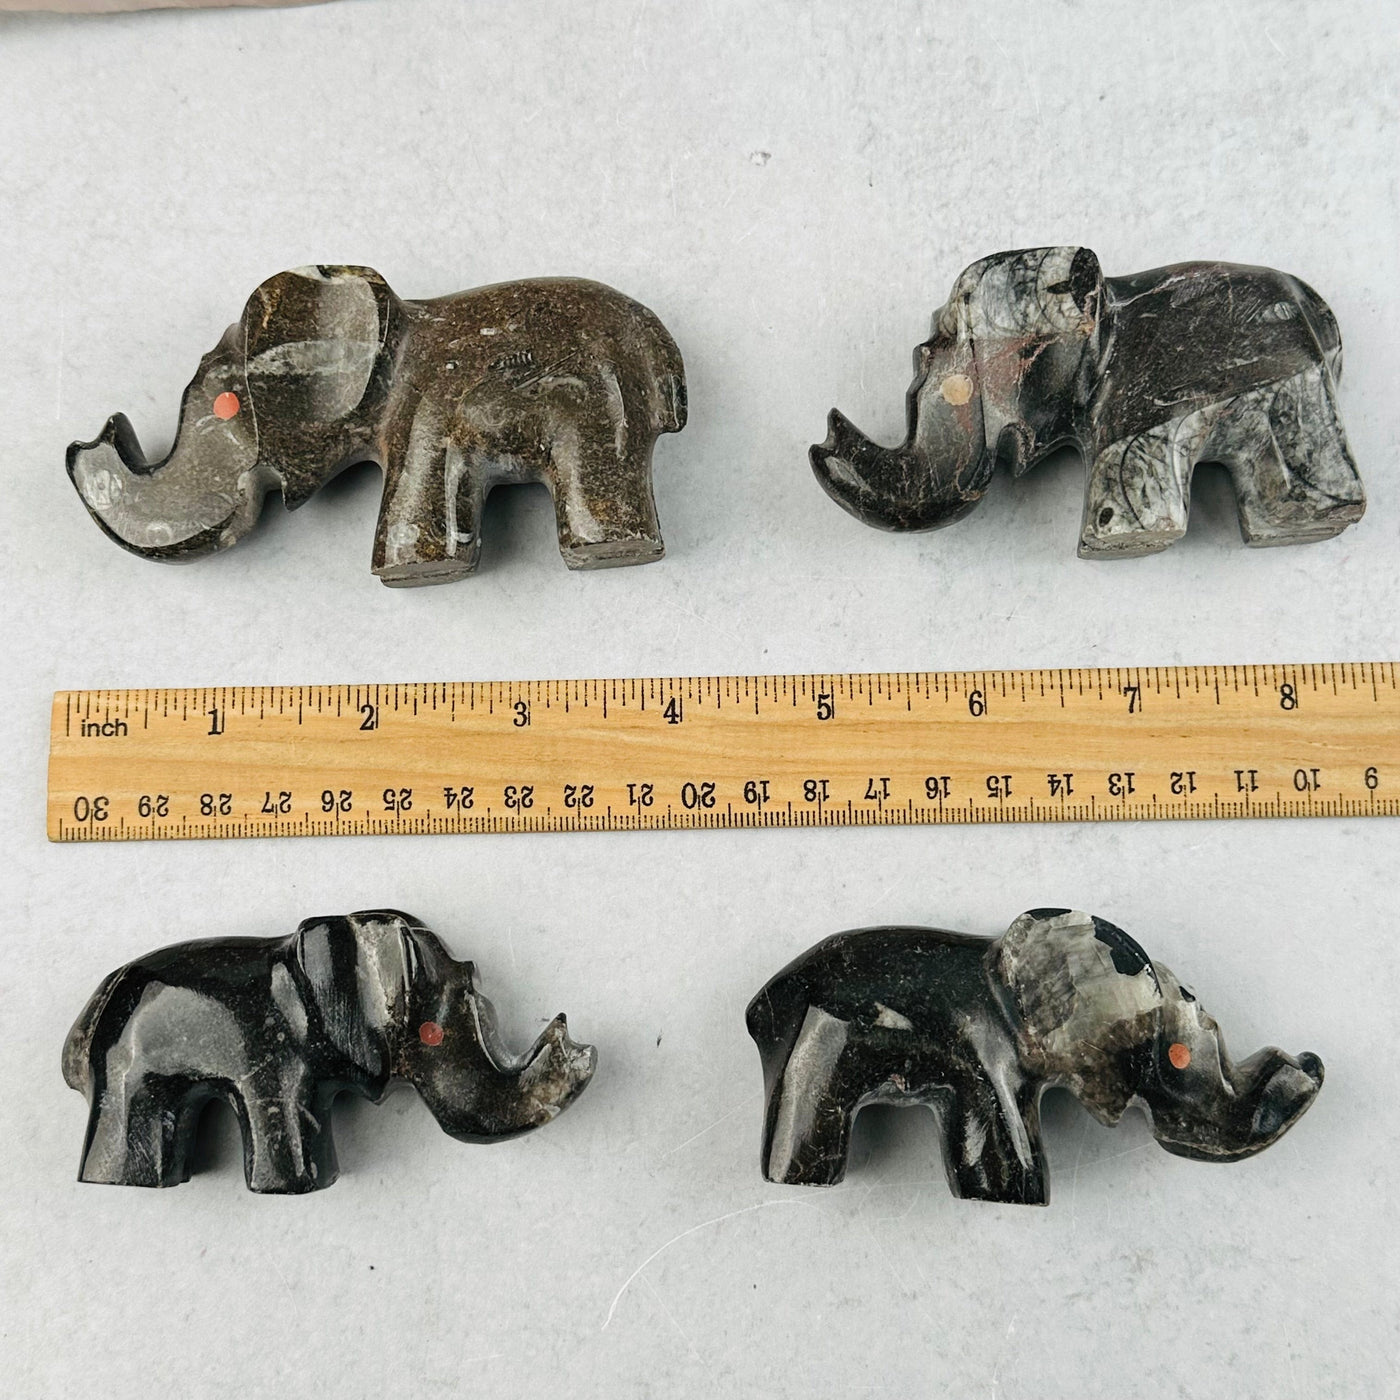 Orthoceras Polished Elephants next to a ruler for size reference 